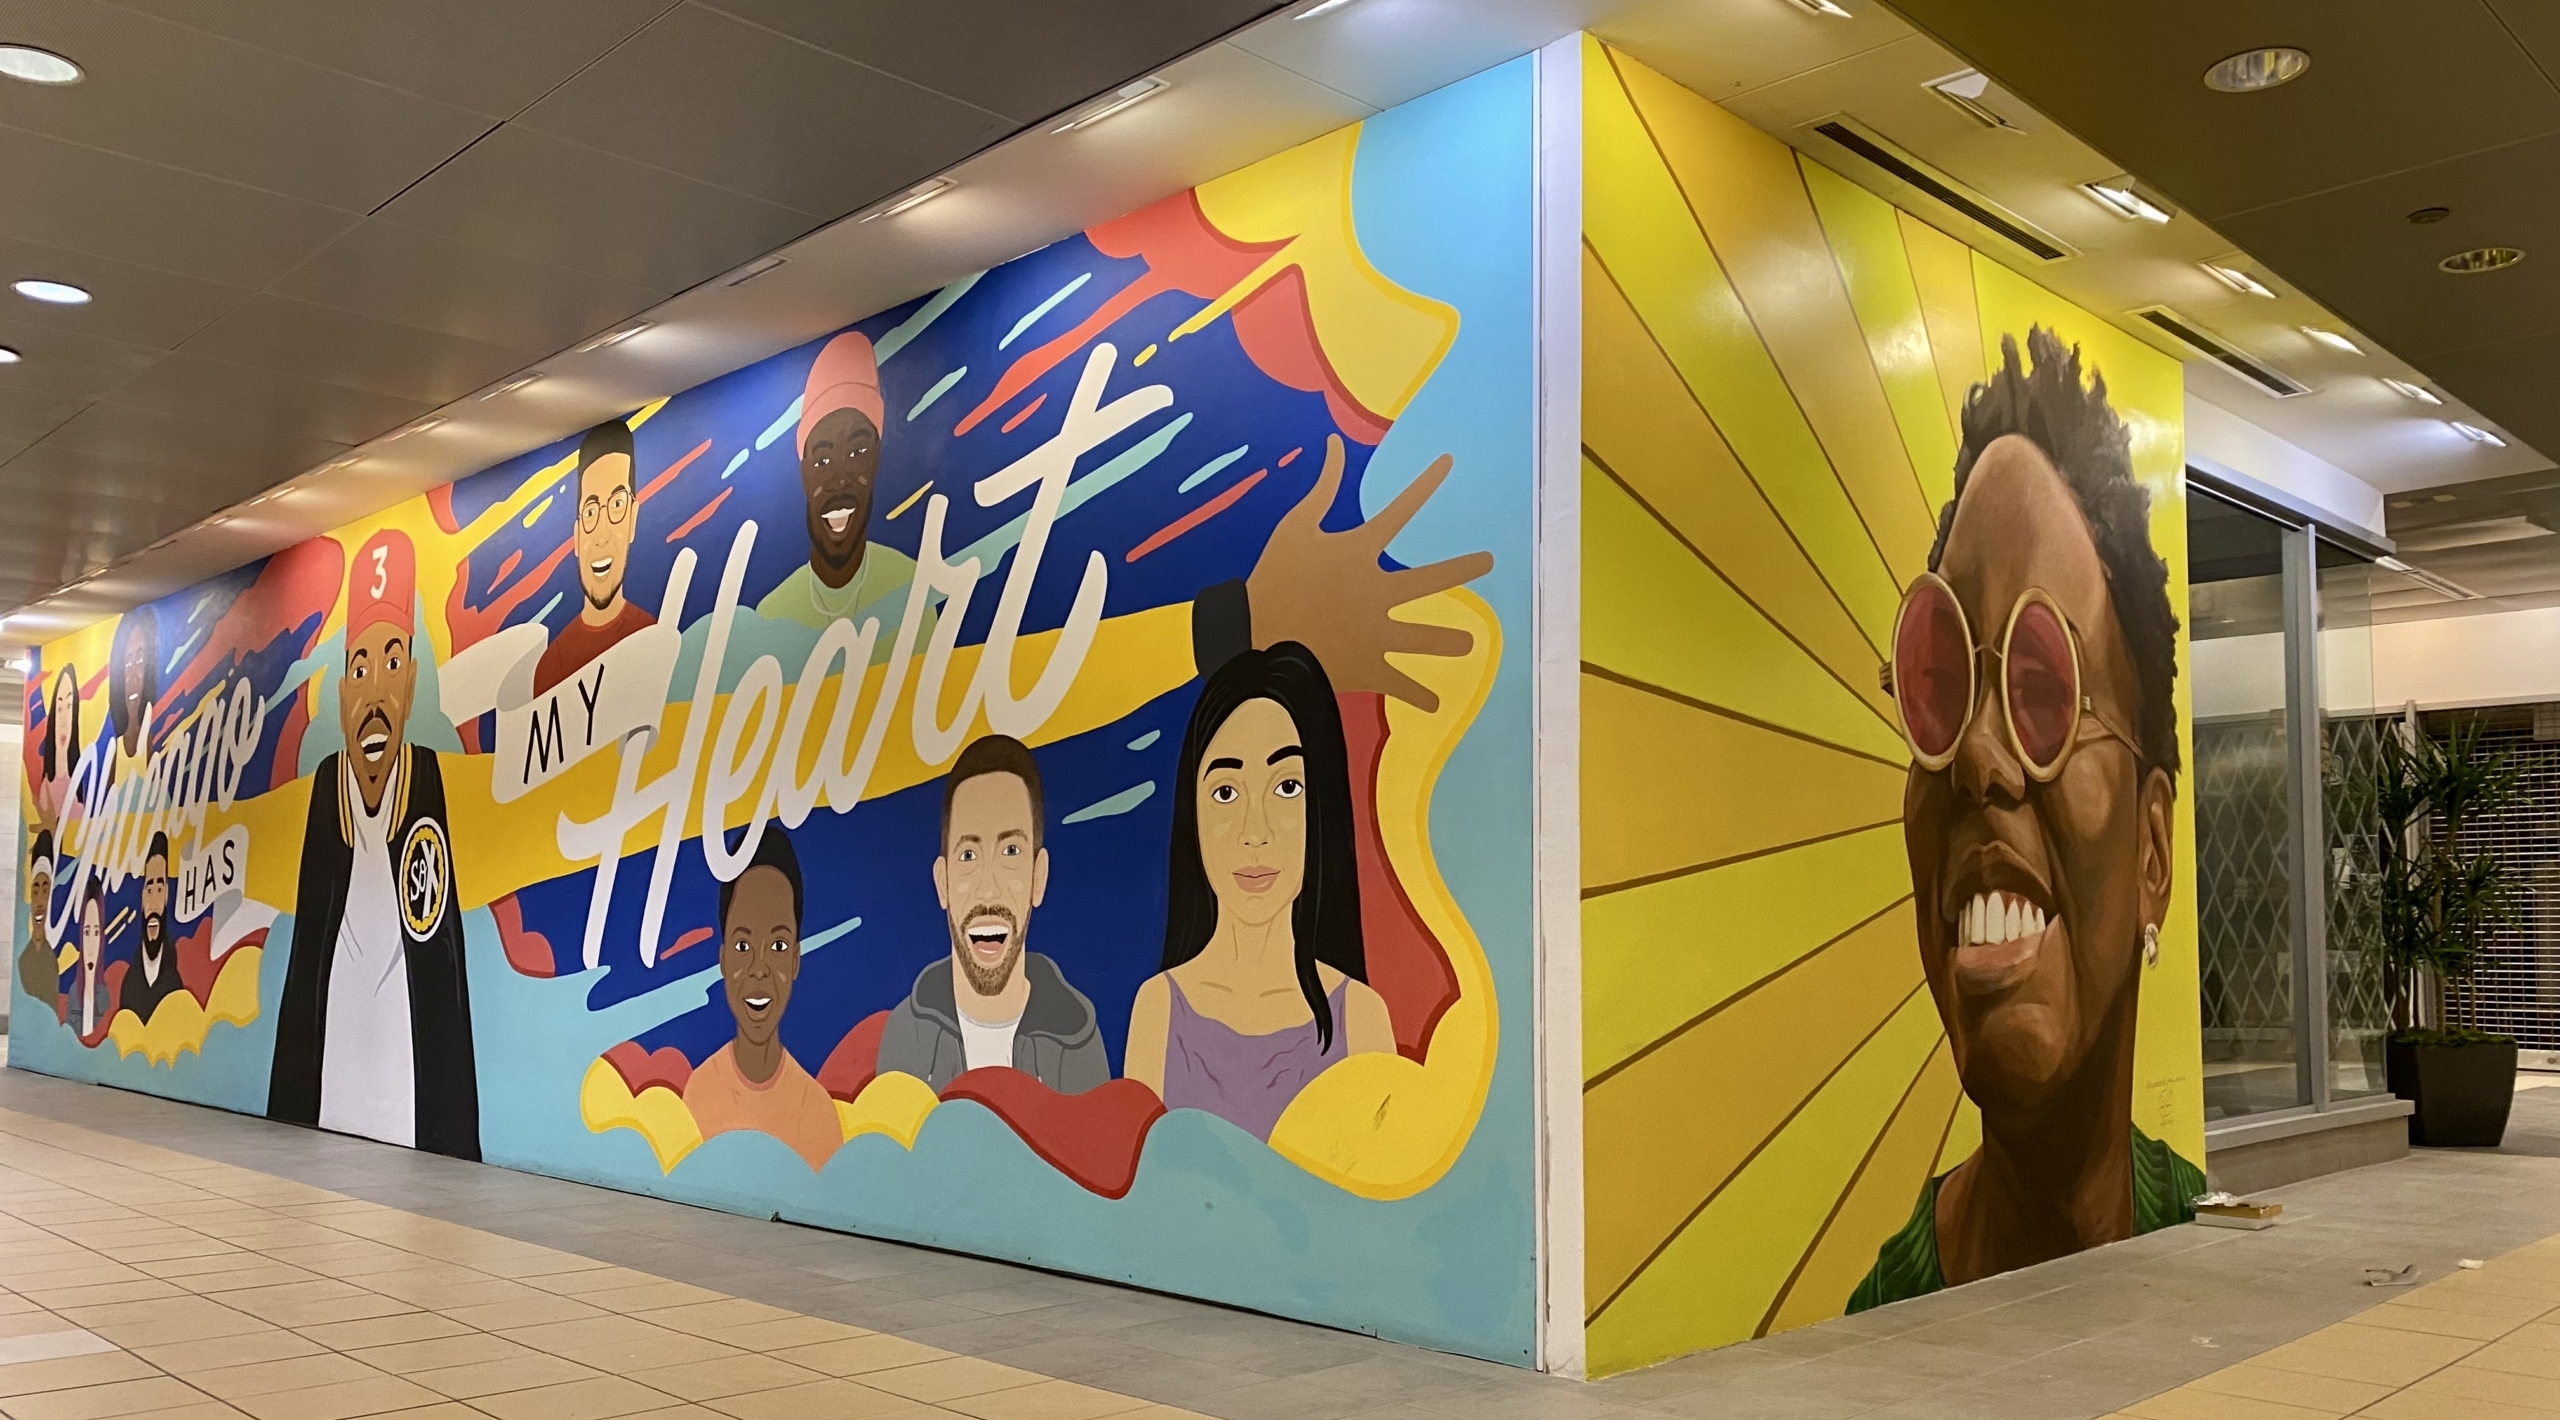 Mural celebrating influential creatives in Chicago made by SAIC undergraduate students Image description: Large mural with influential creatives in Chicago with the words Chicago has my heart painted across.